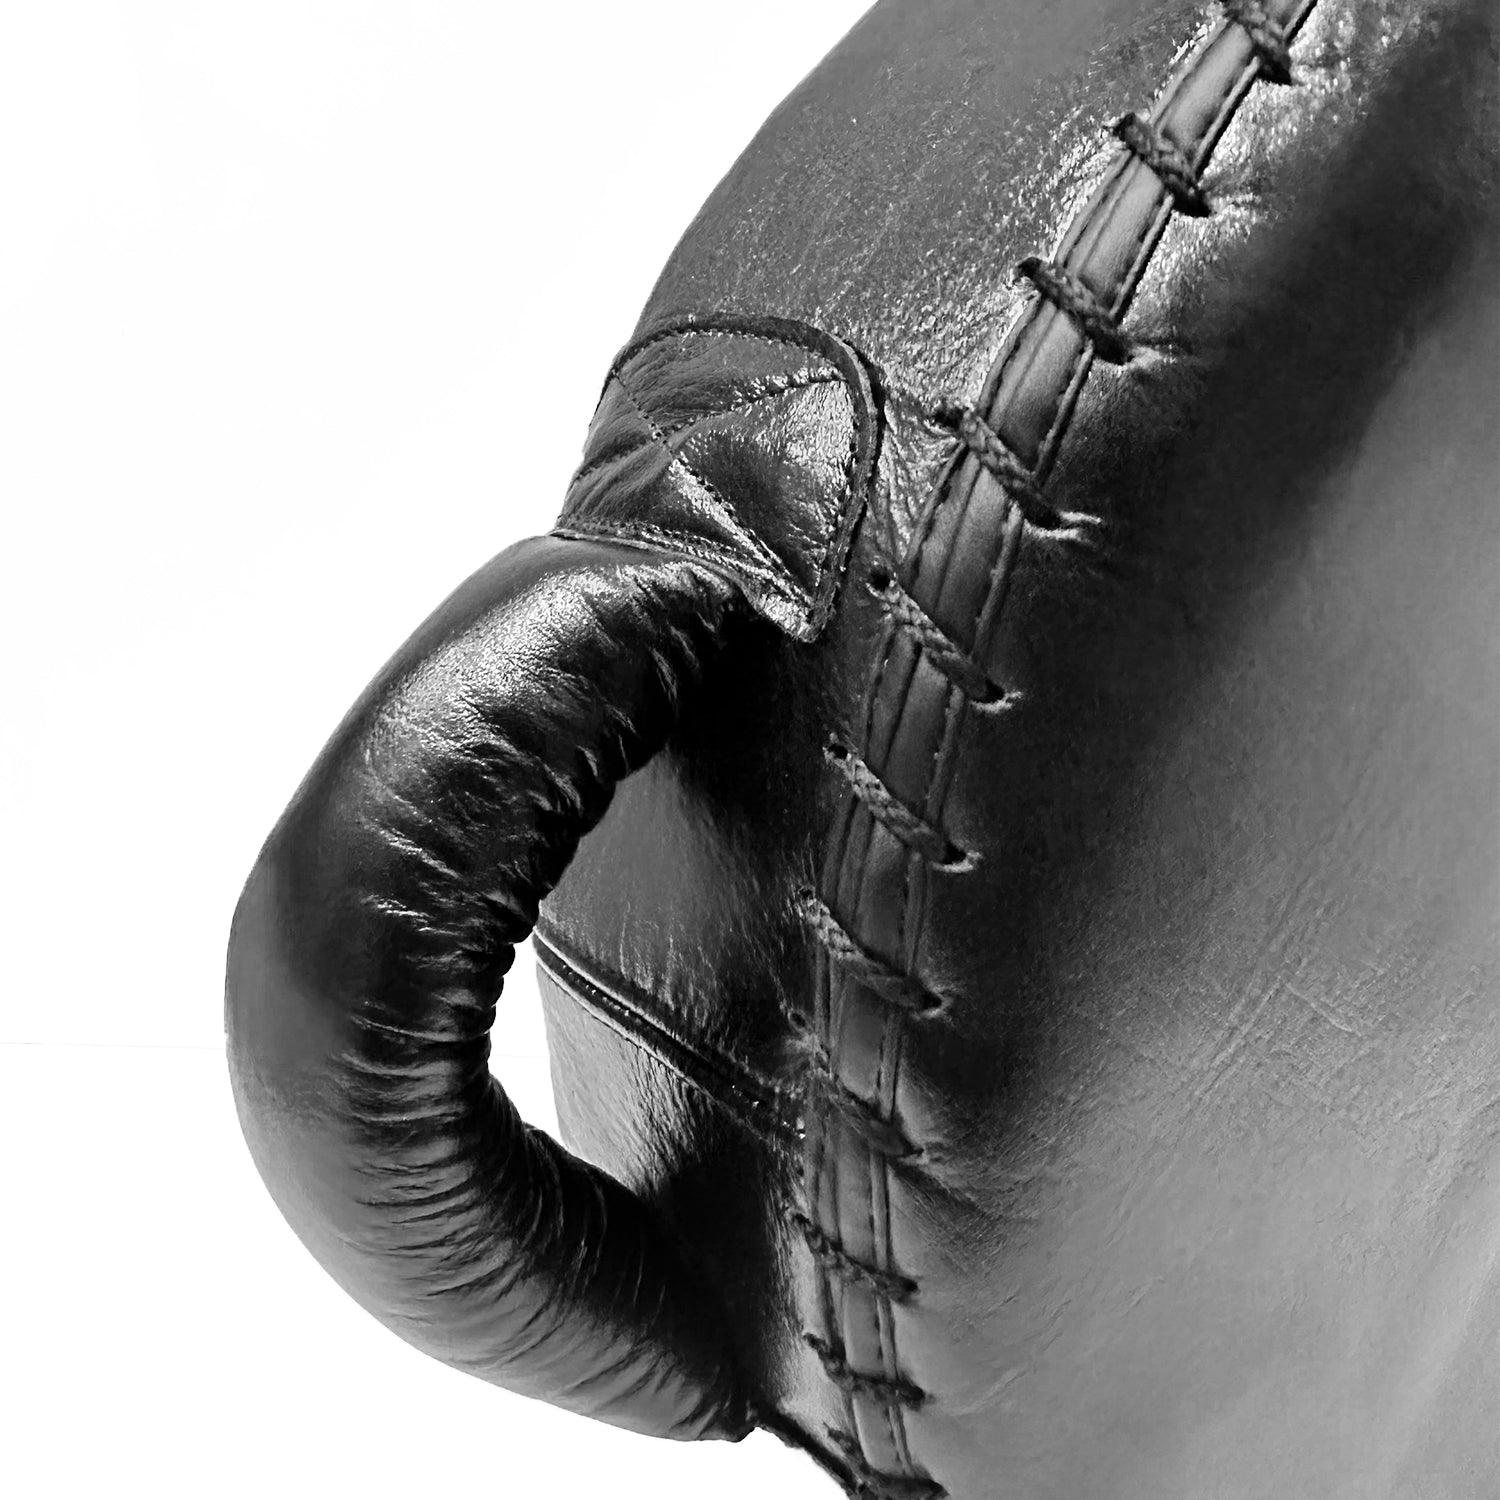 RingMaster Sports SHLDX Round Kick Shield Synthetic Leather Black - RINGMASTER SPORTS - Made For Champions